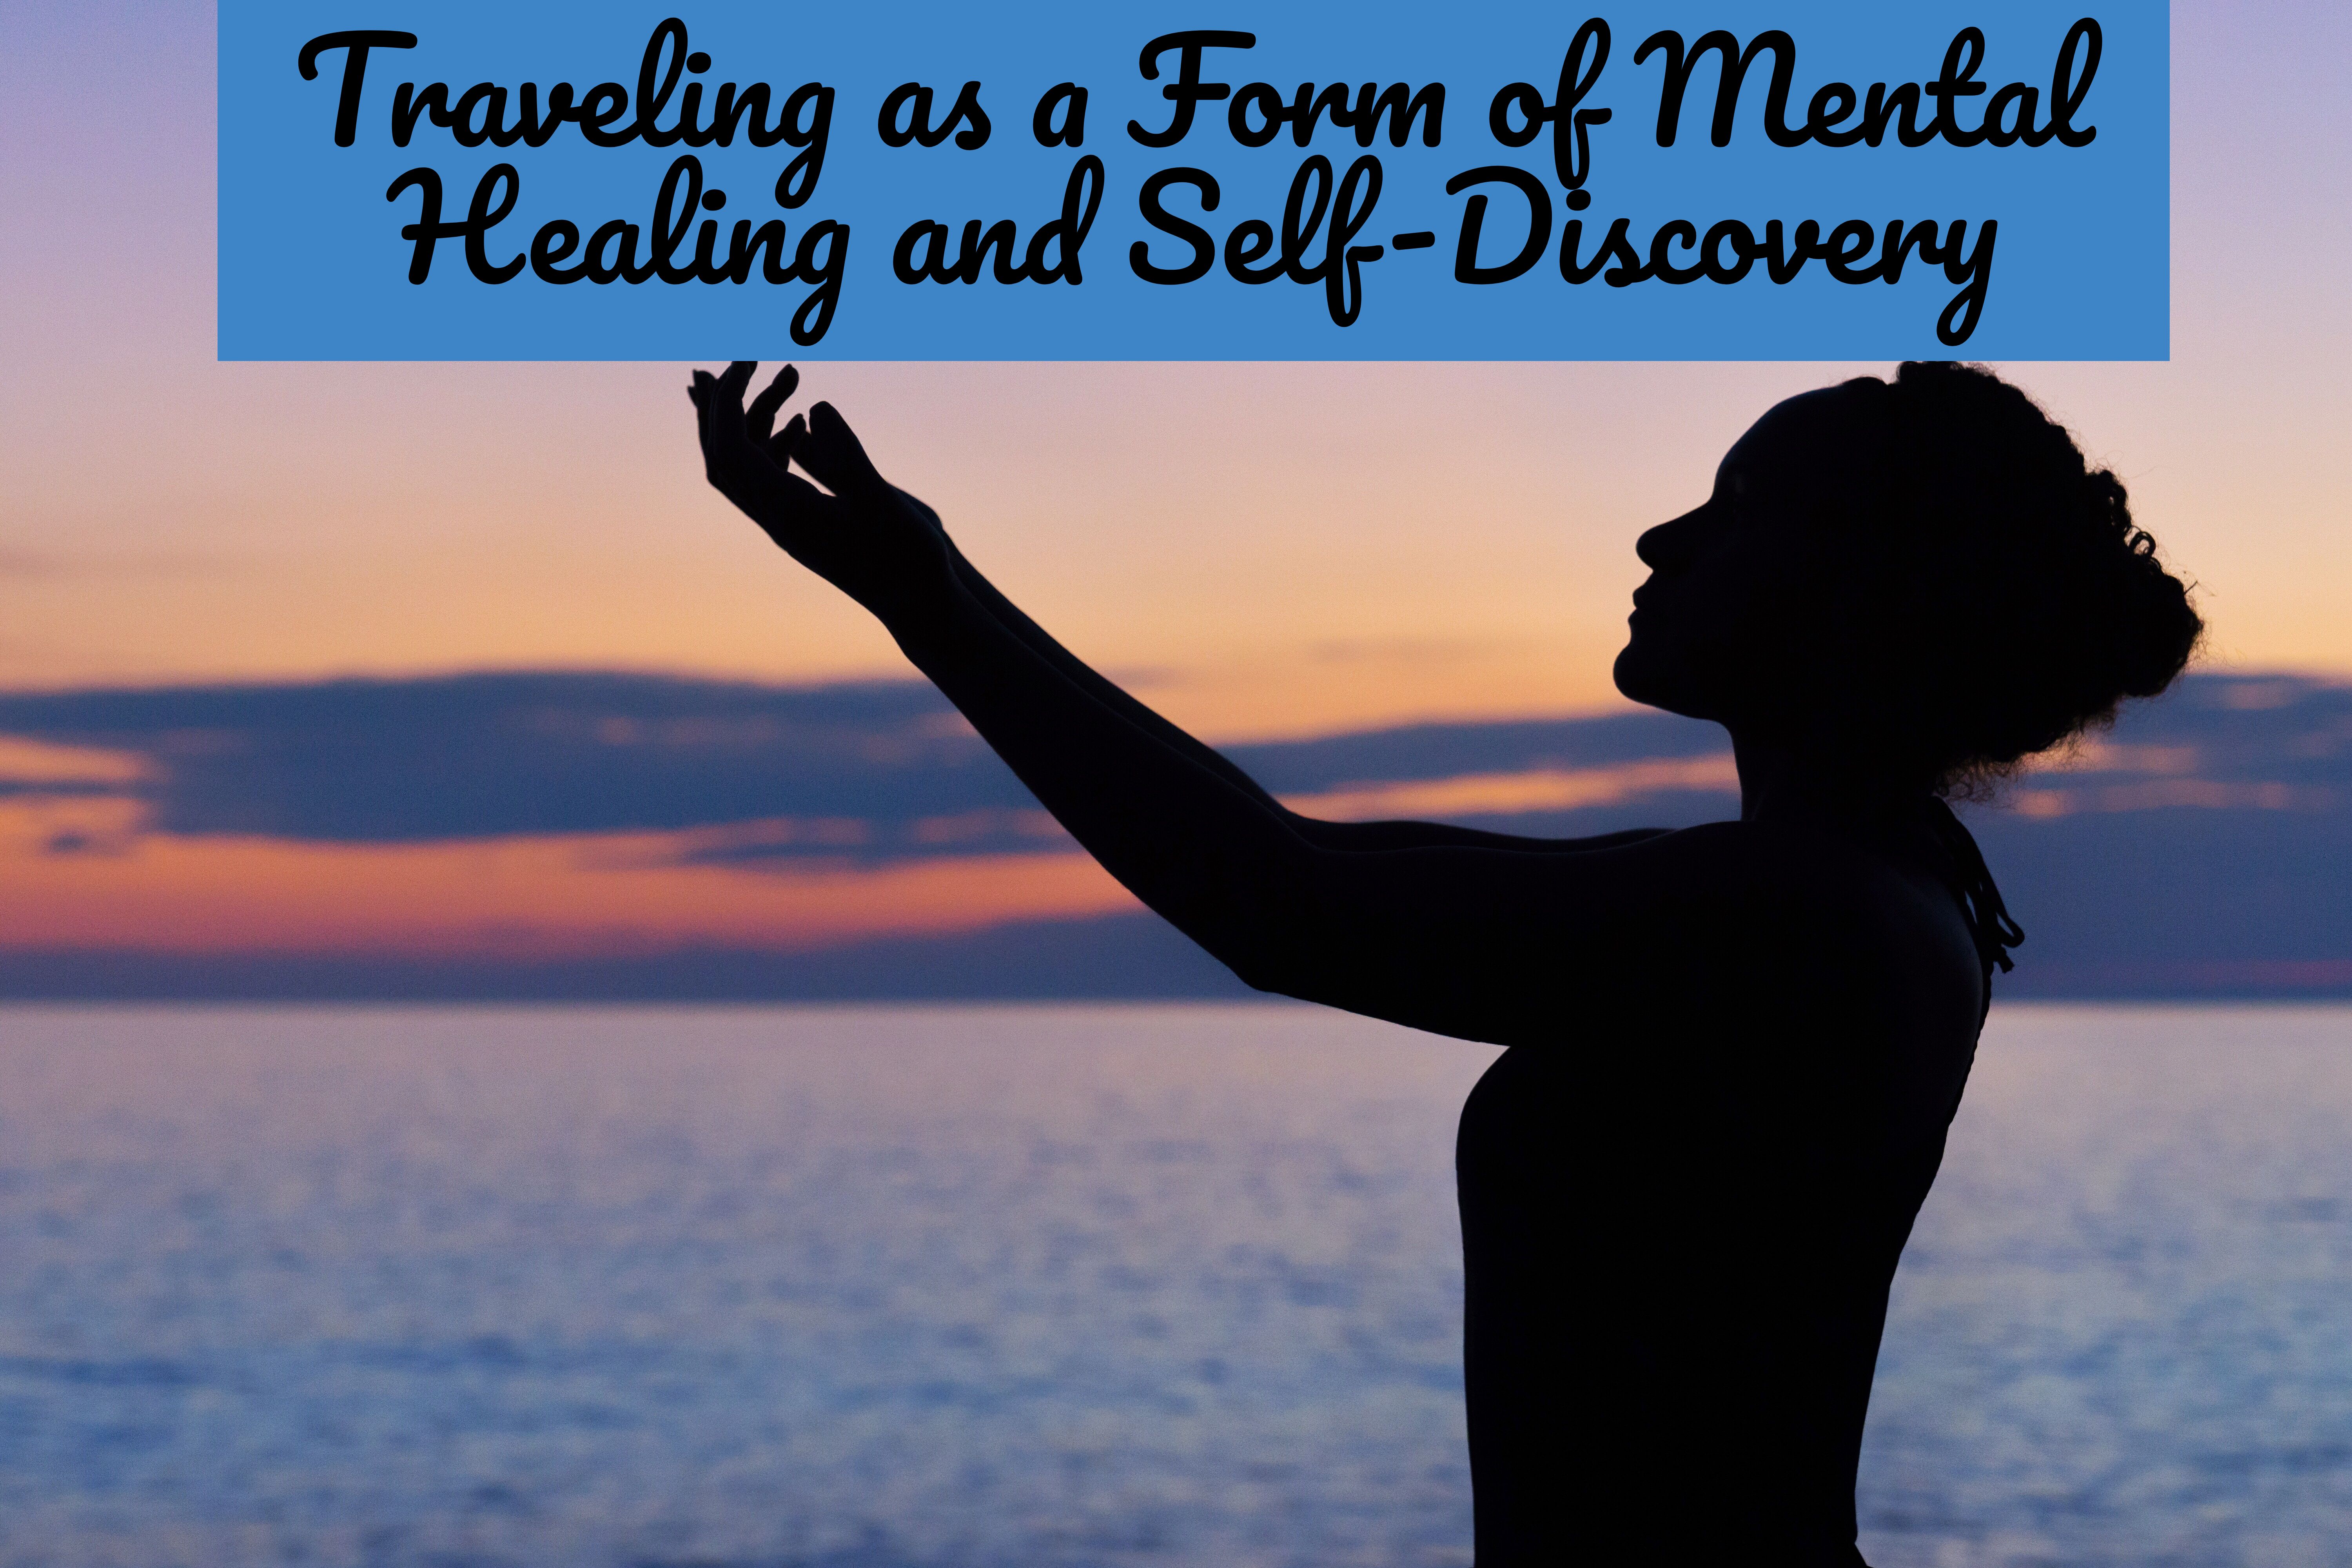 "Traveling as a Form of Mental Healing and Self Discovery "